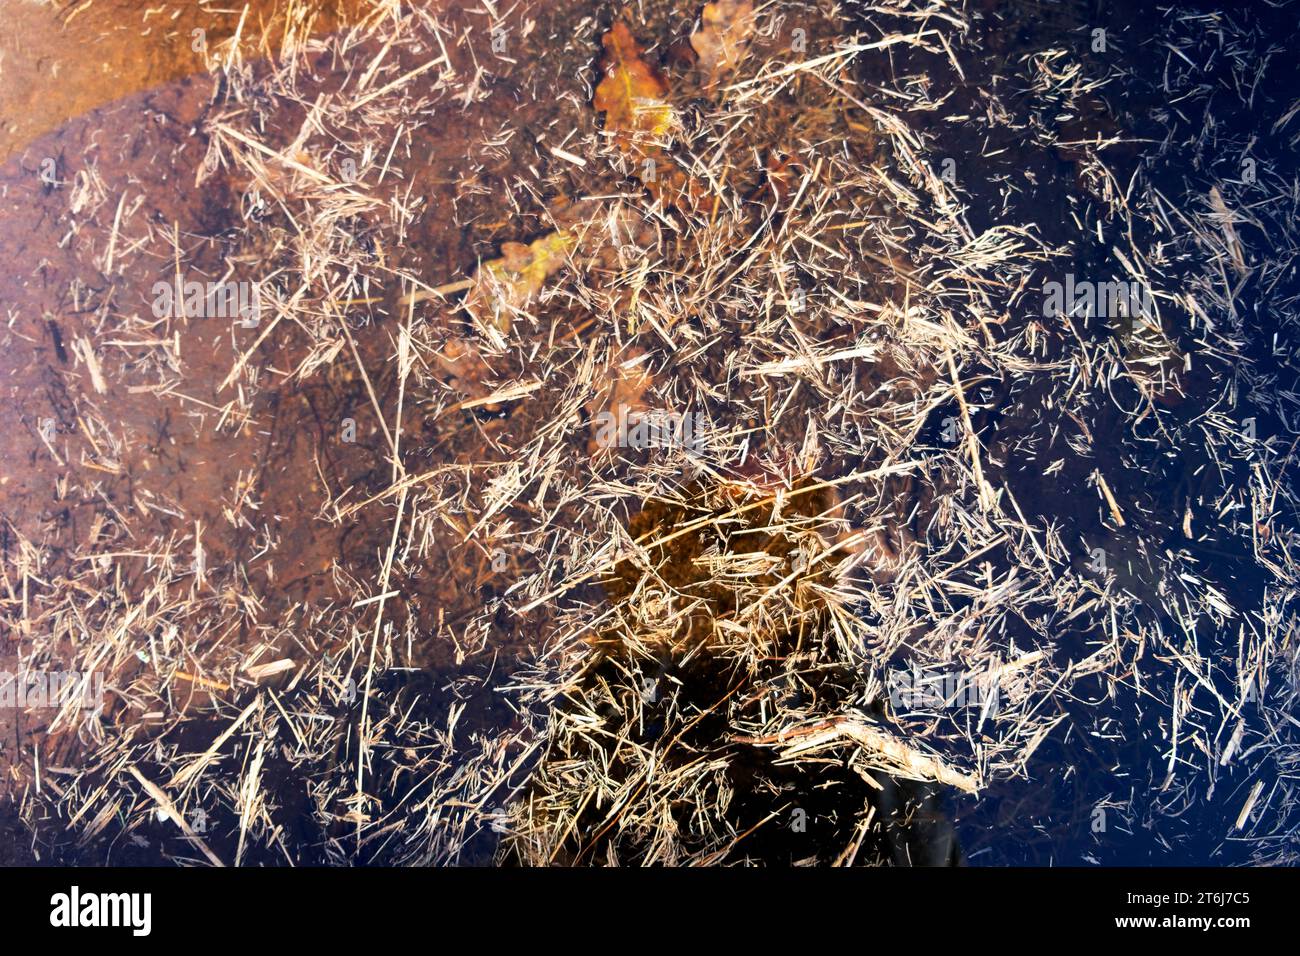 Nature background grasses dry grass bits floating in water view from above looking down on into pond in winter UK KATHY DEWITT Stock Photo